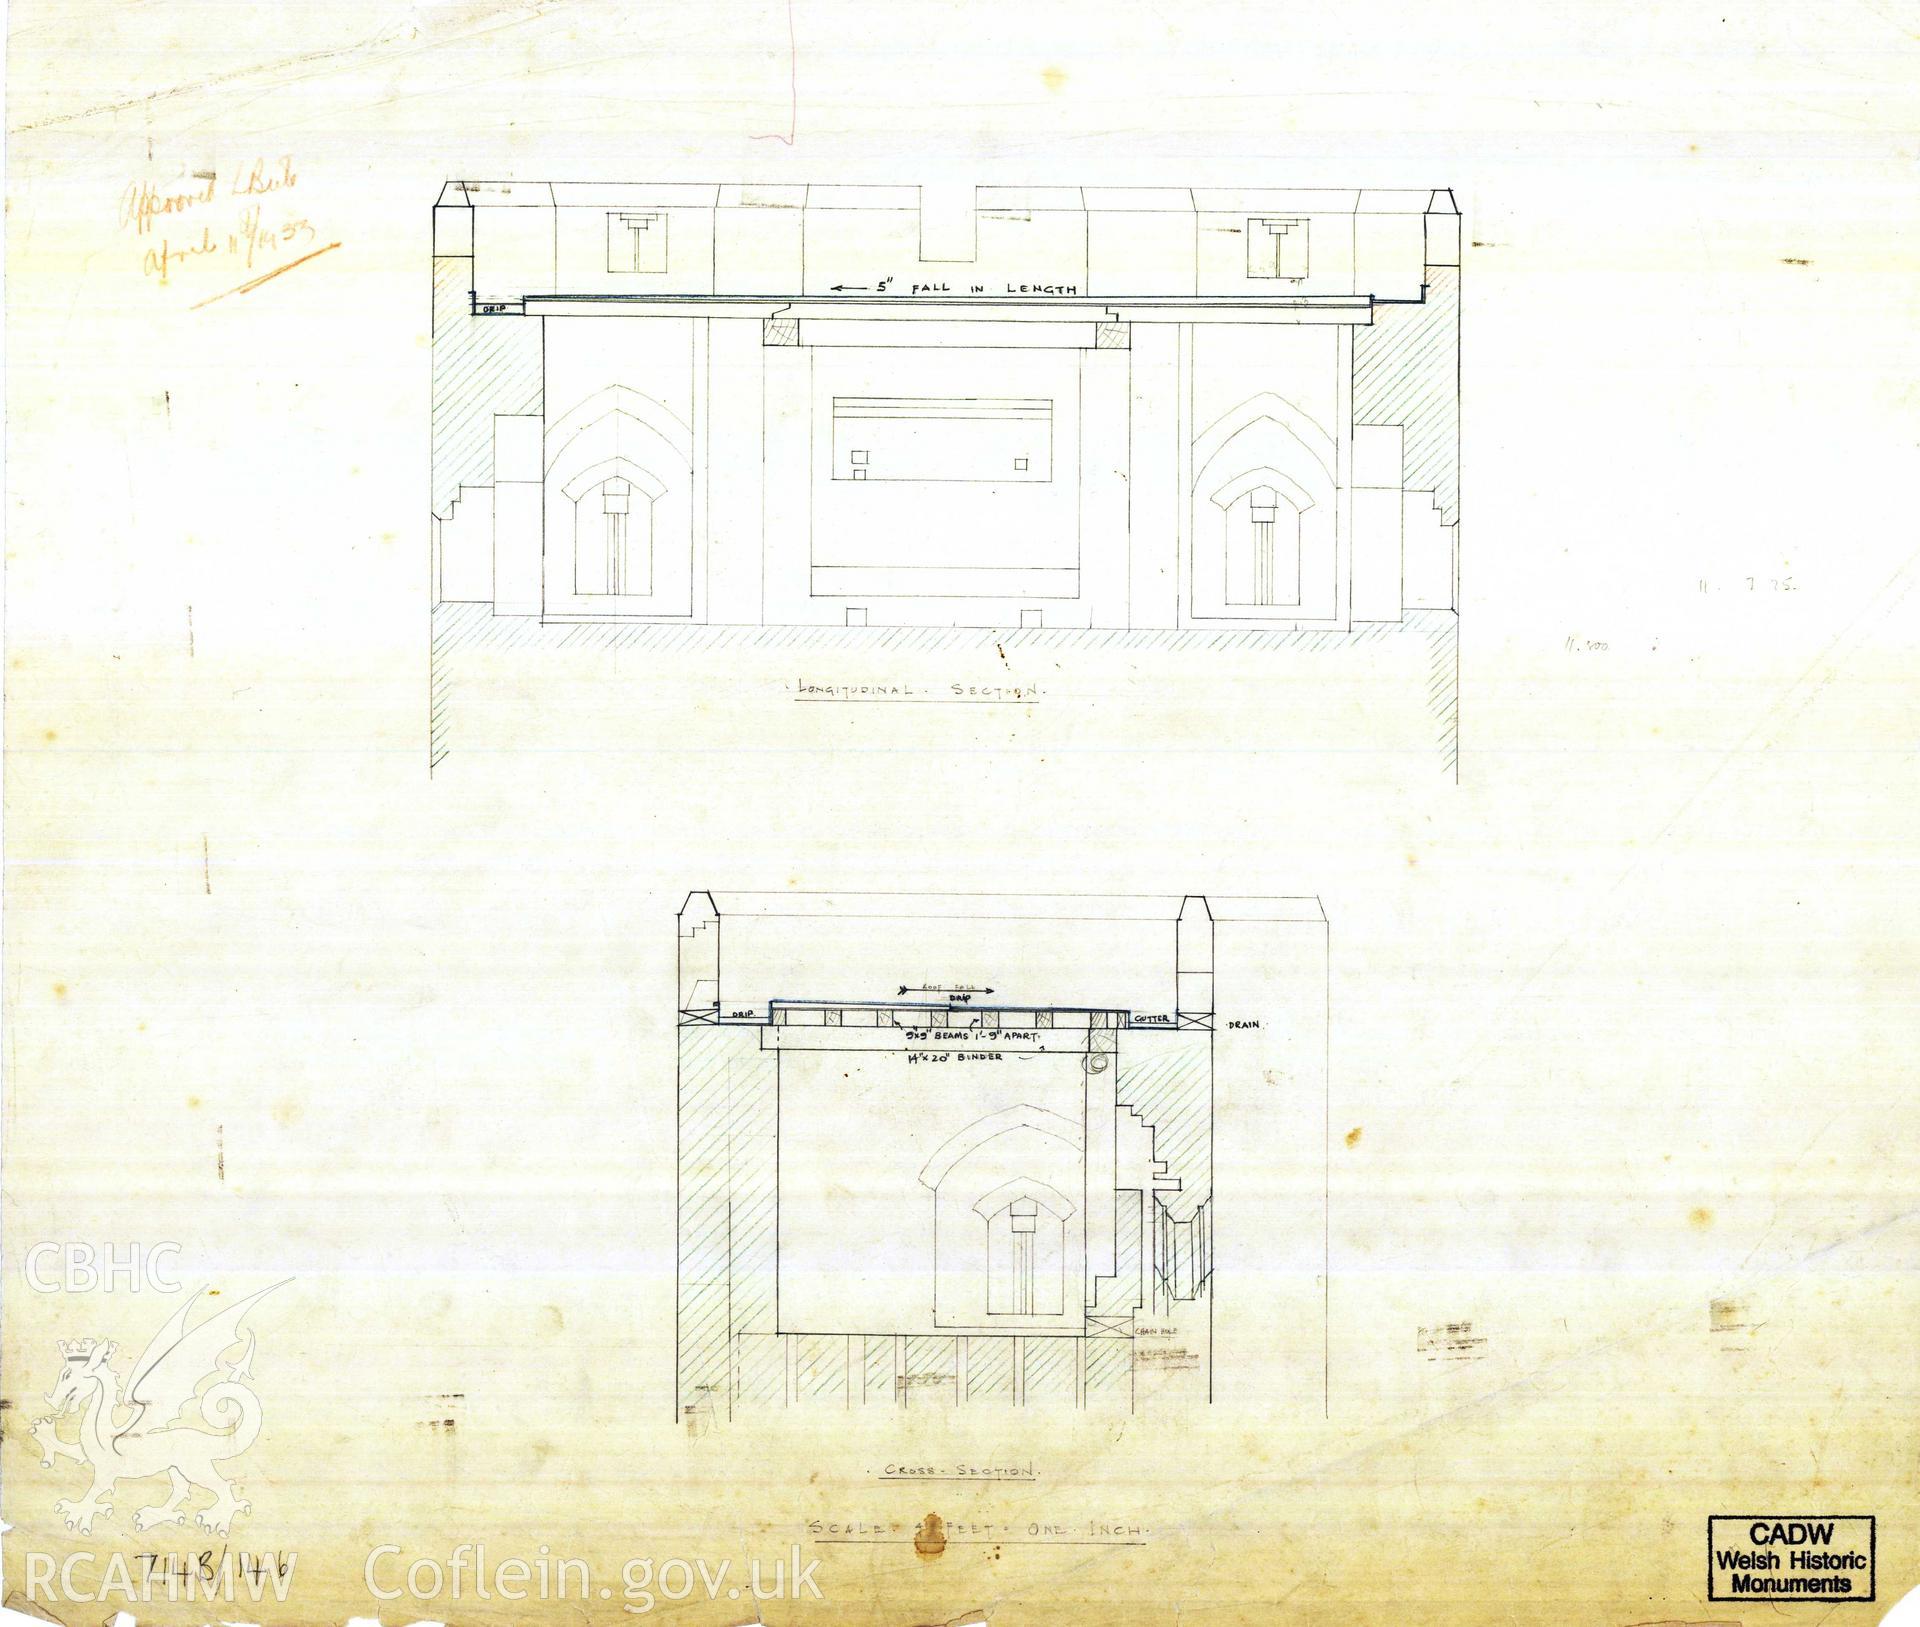 Digital copy of Cadw guardianship monument drawing of Caerphilly Castle. Outer E gate, upper int elevs (ii). Cadw ref. no: 714B/14b. Scale 1:[48].  Original drawing withdrawn and returned to Cadw at their request.